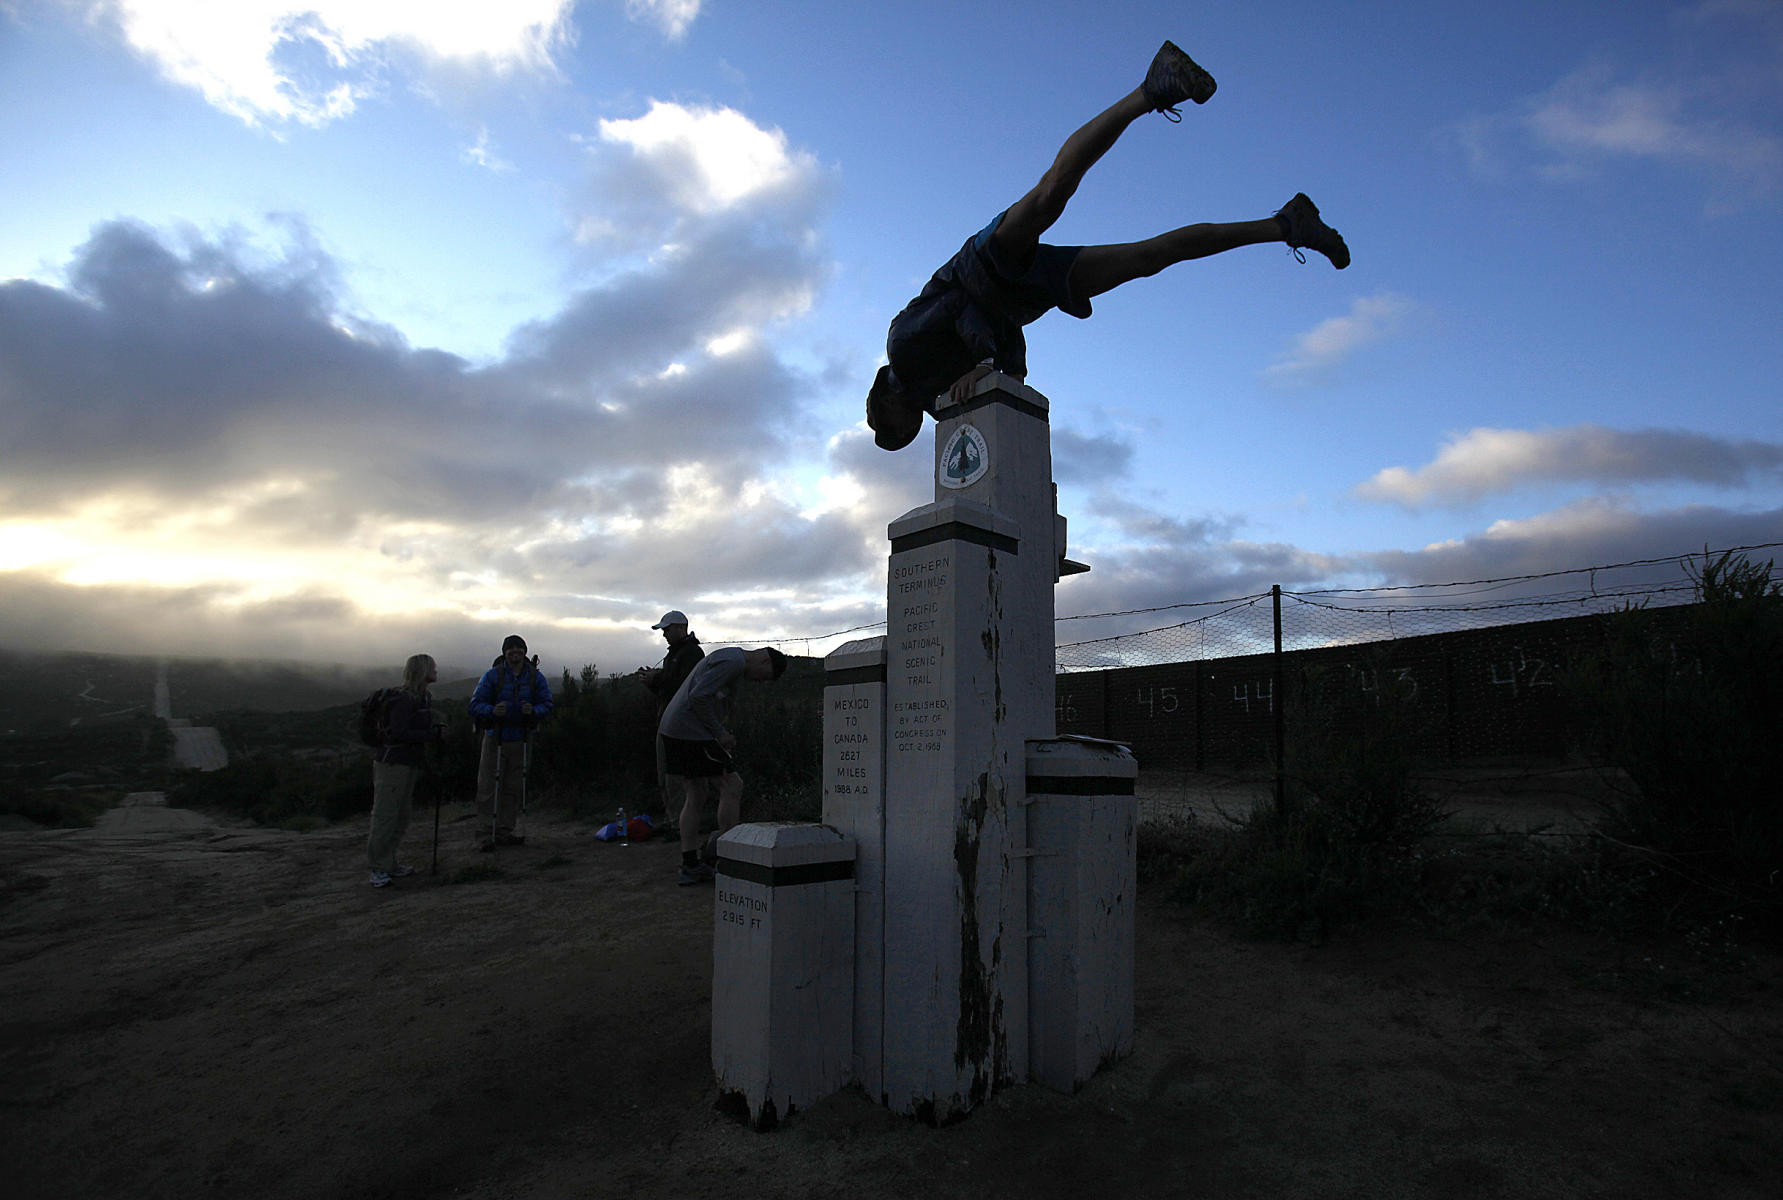 Pacific Crest Trail hikers at US-Mexico border, San Diego County